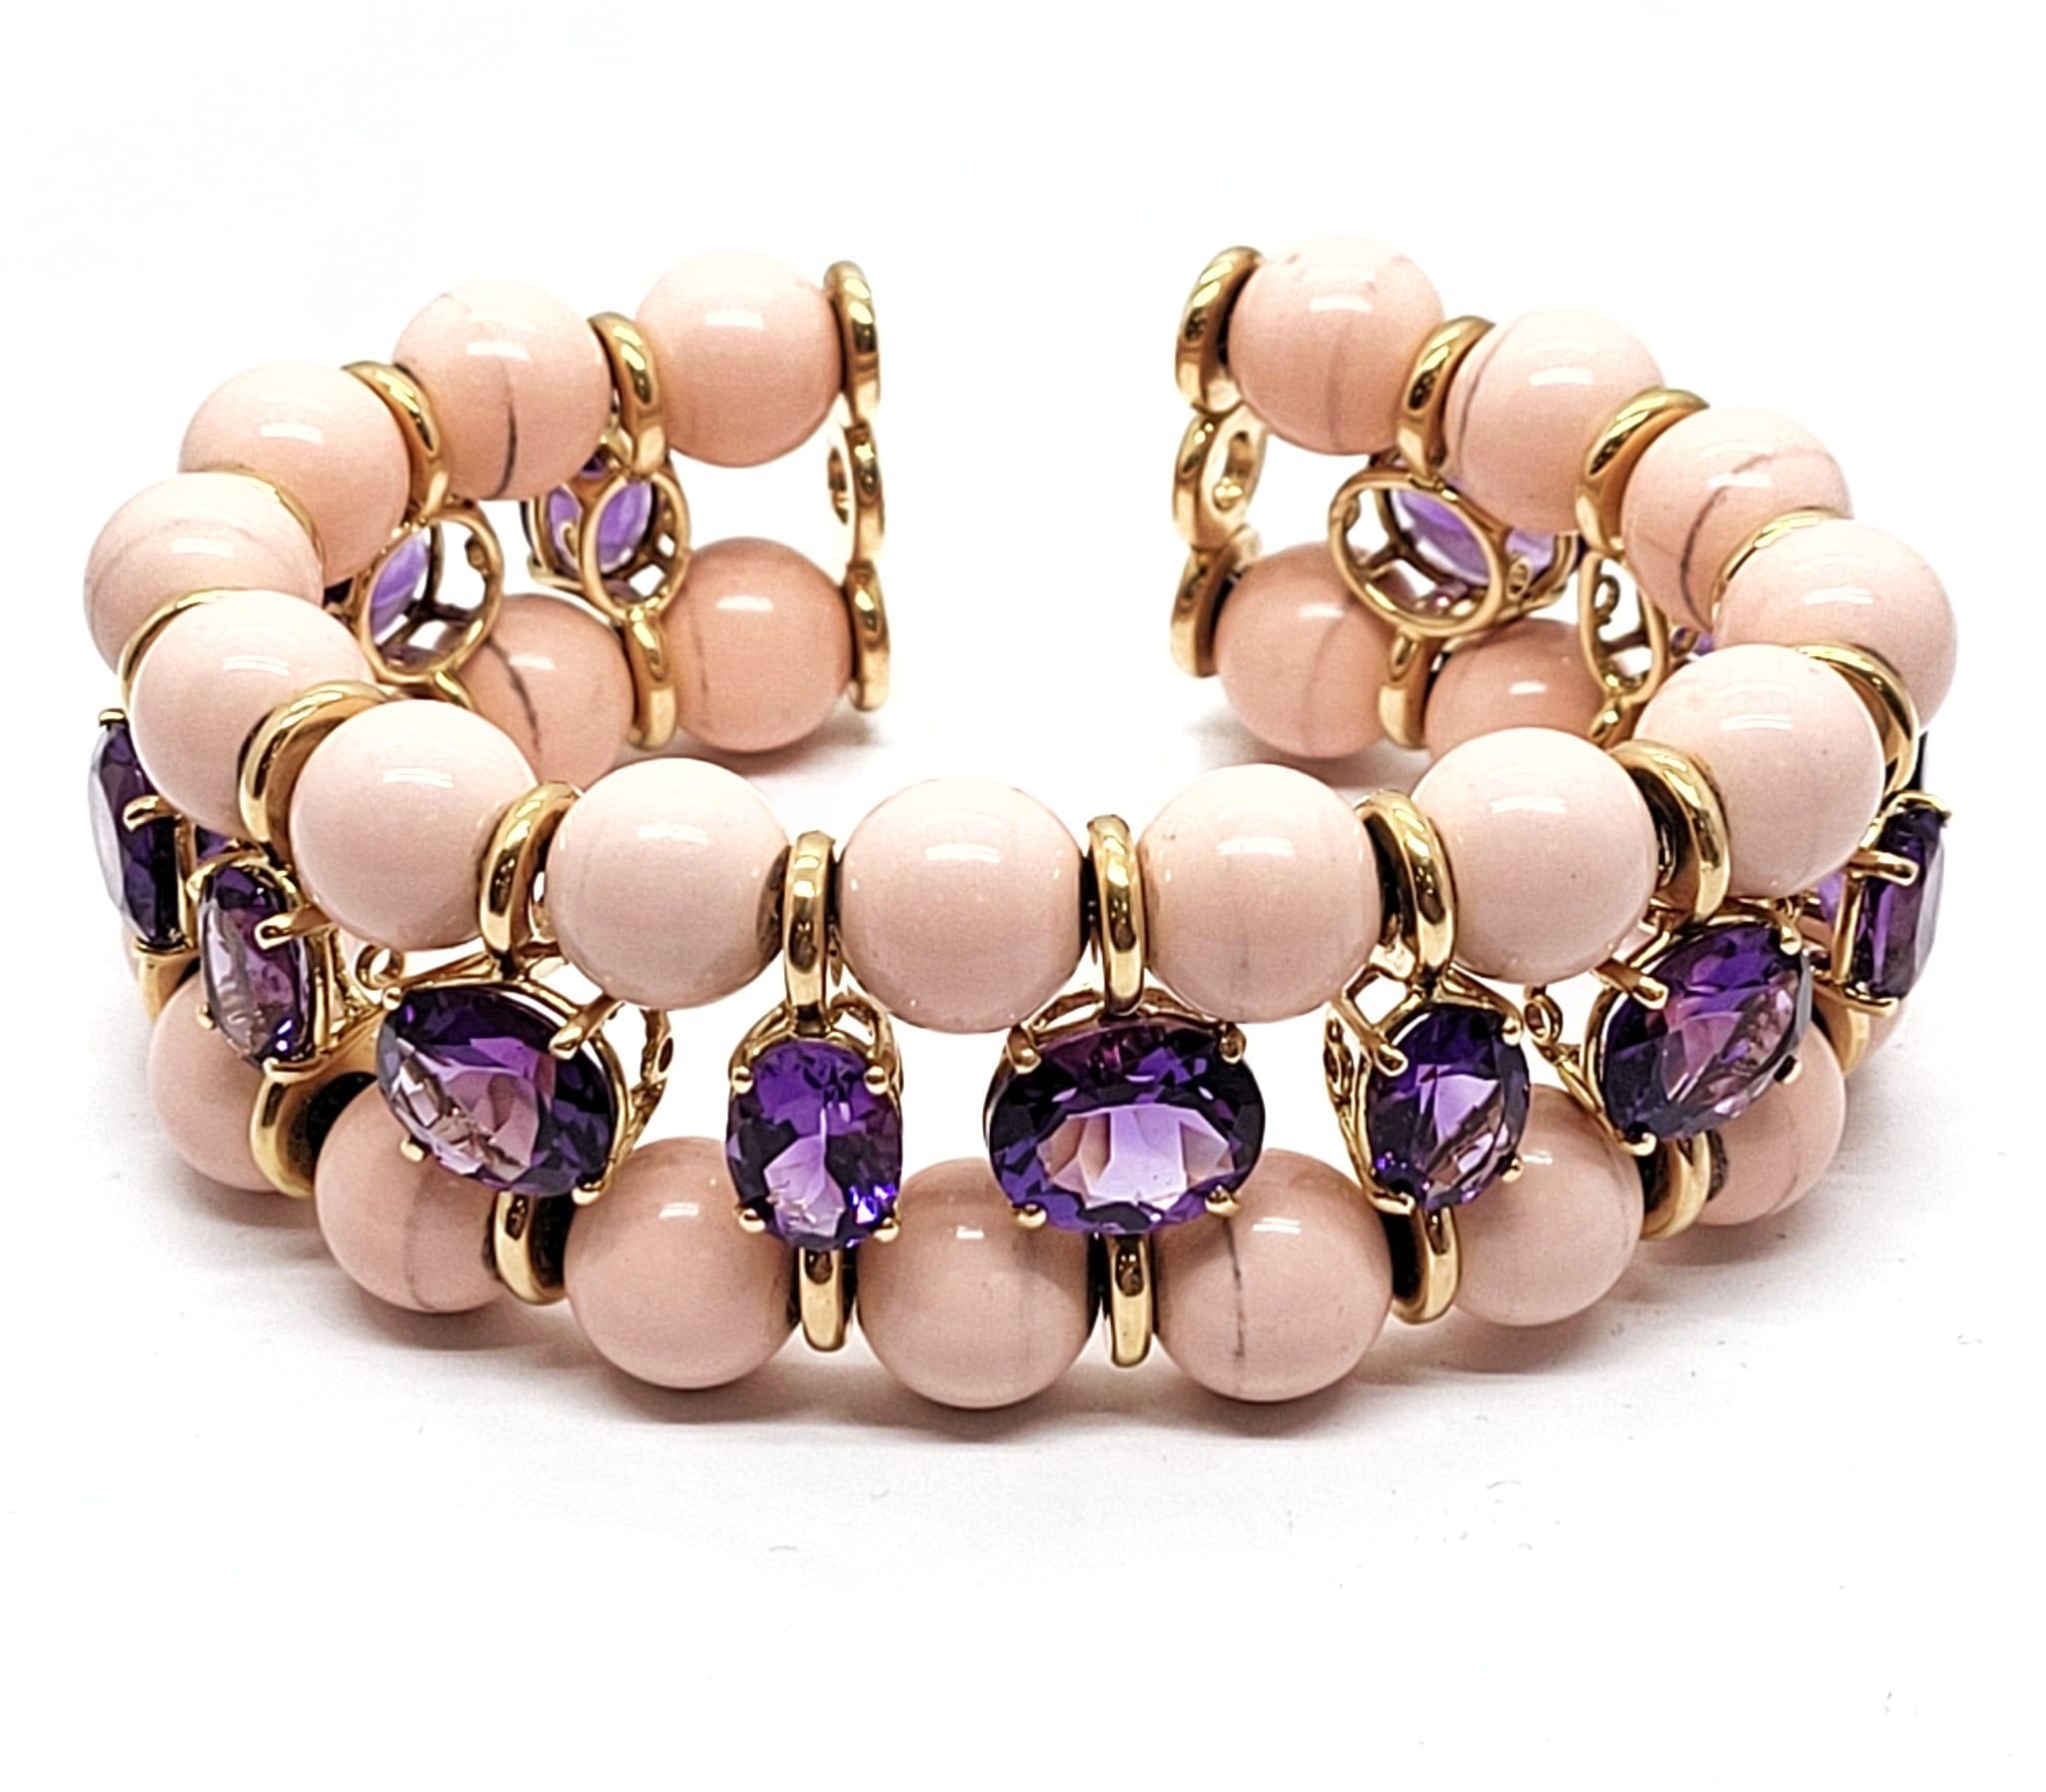 Andreoli 32.93 Carat Amethyst Coral 18 Karat Yellow Gold Bracelet

This bracelet features:
- 32.93 Carat Amethyst
- Angelskin Coral
- 18K Yellow Gold
- Made In Italy